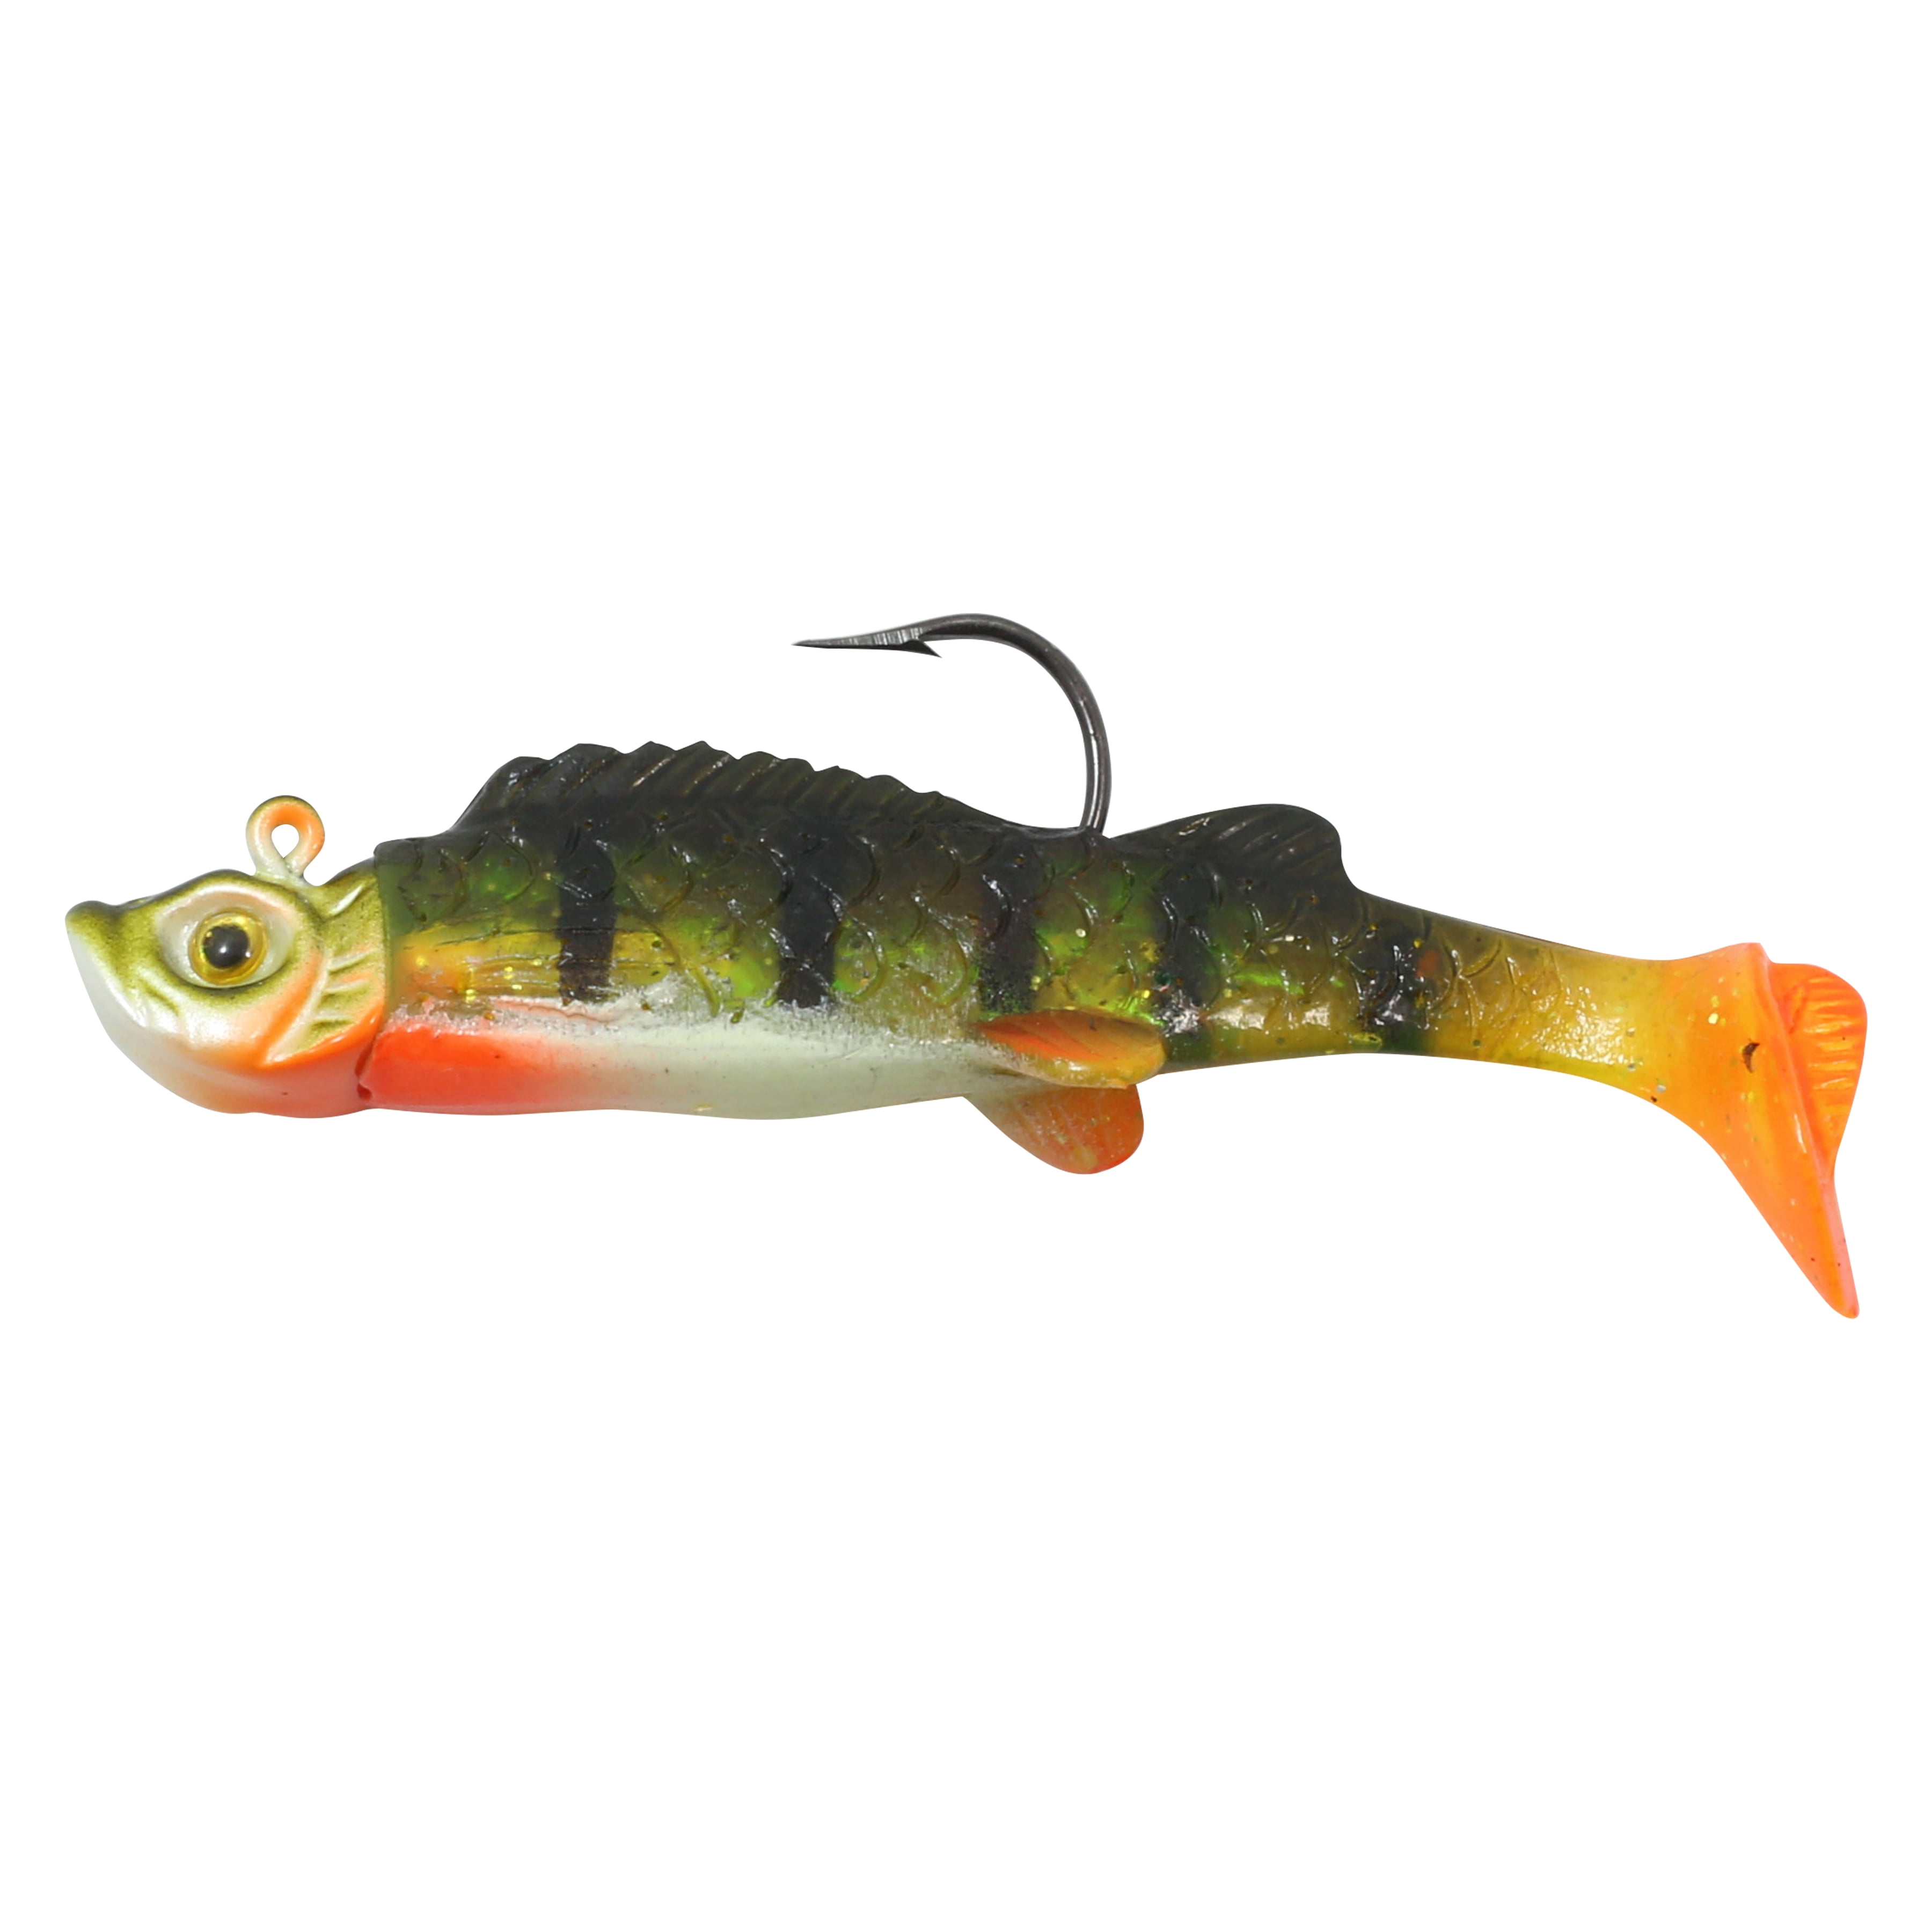  Northland Fishing Tackle Tungsten Freshwater Jig